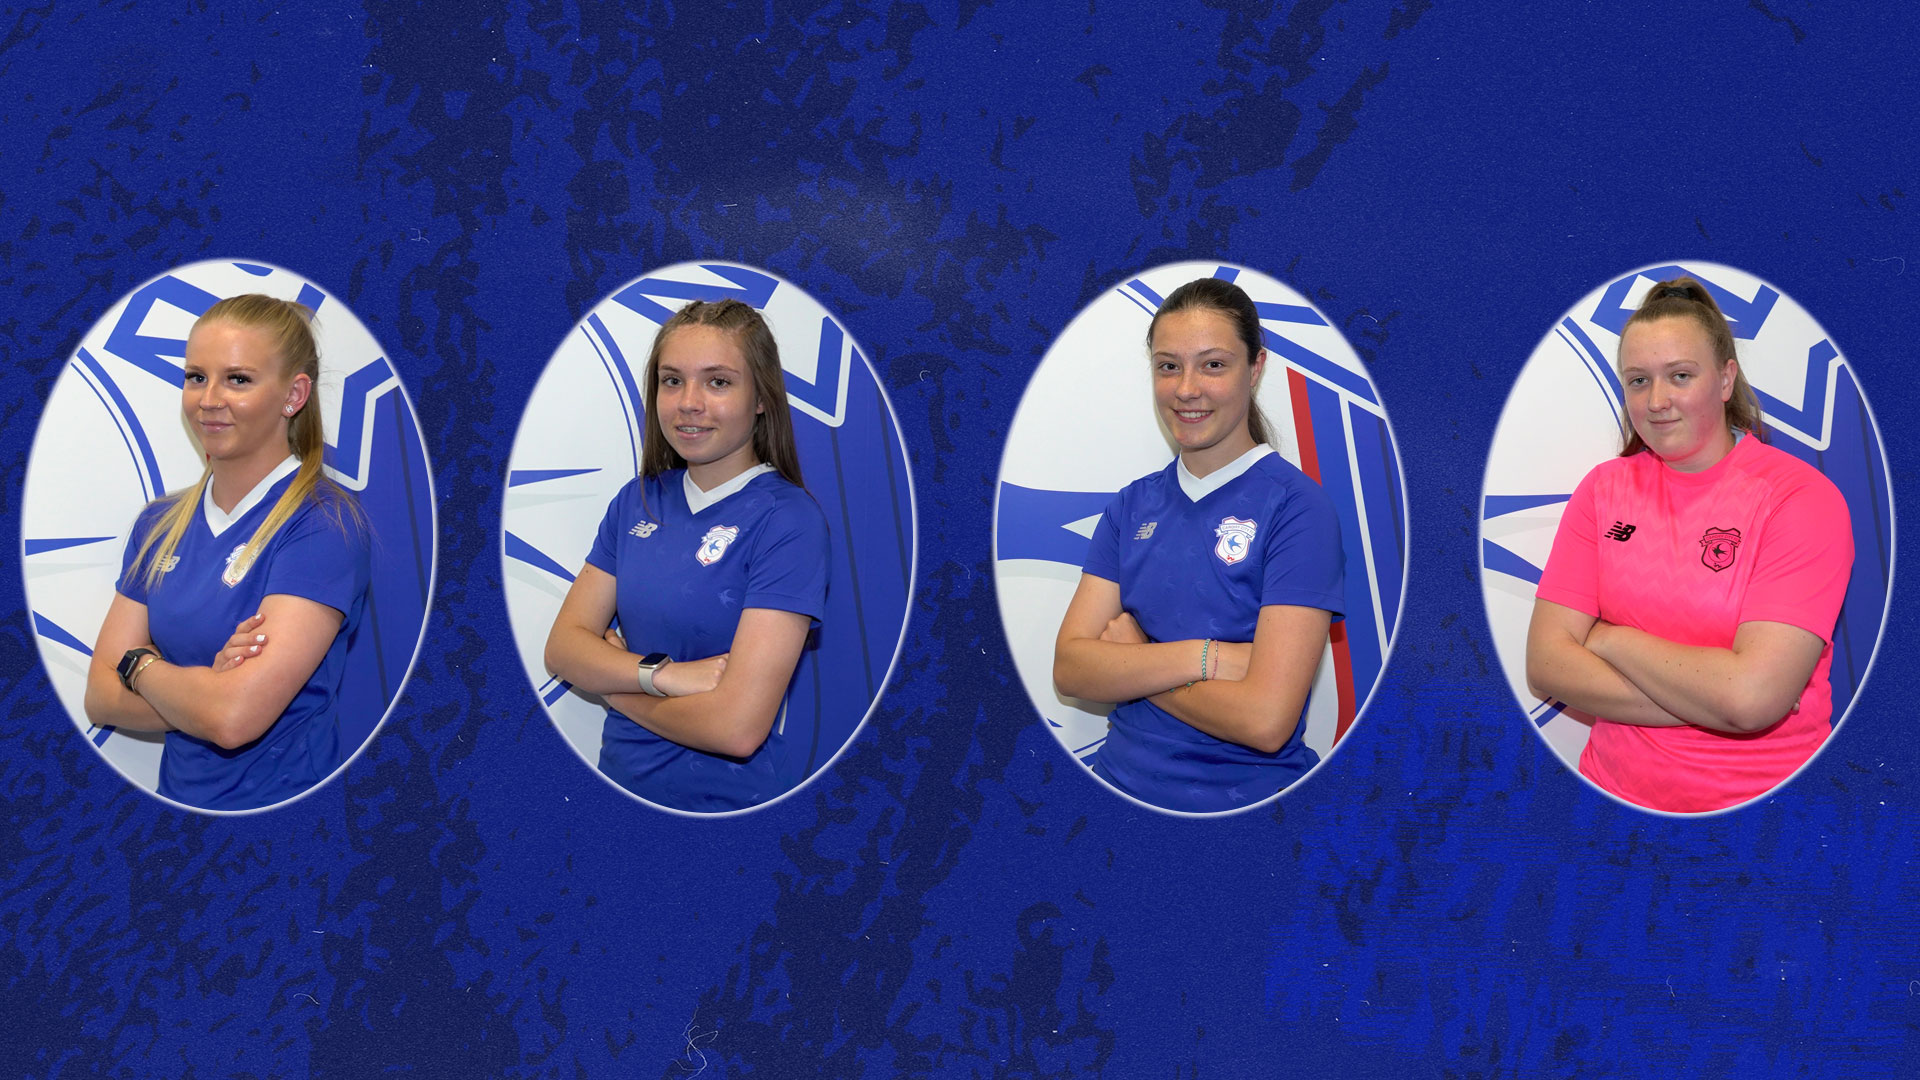 Rhianne Oakley, Evie Hughes, Megan Bowen & Emily Roberts have joined Cardiff City...